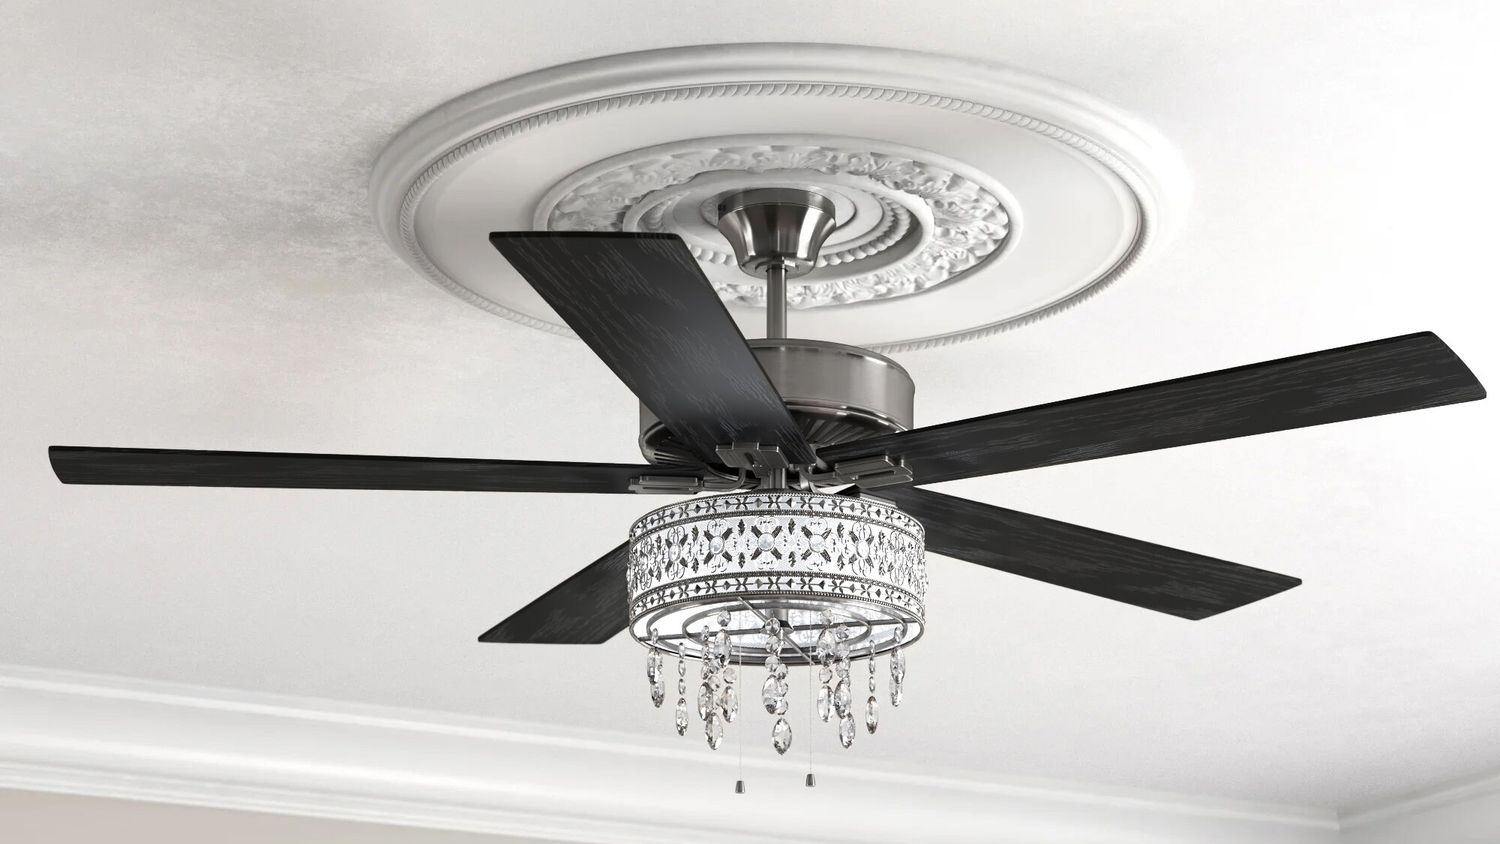 The 10 Best Ceiling Fans In 2021, Who Makes The Best Quality Ceiling Fans